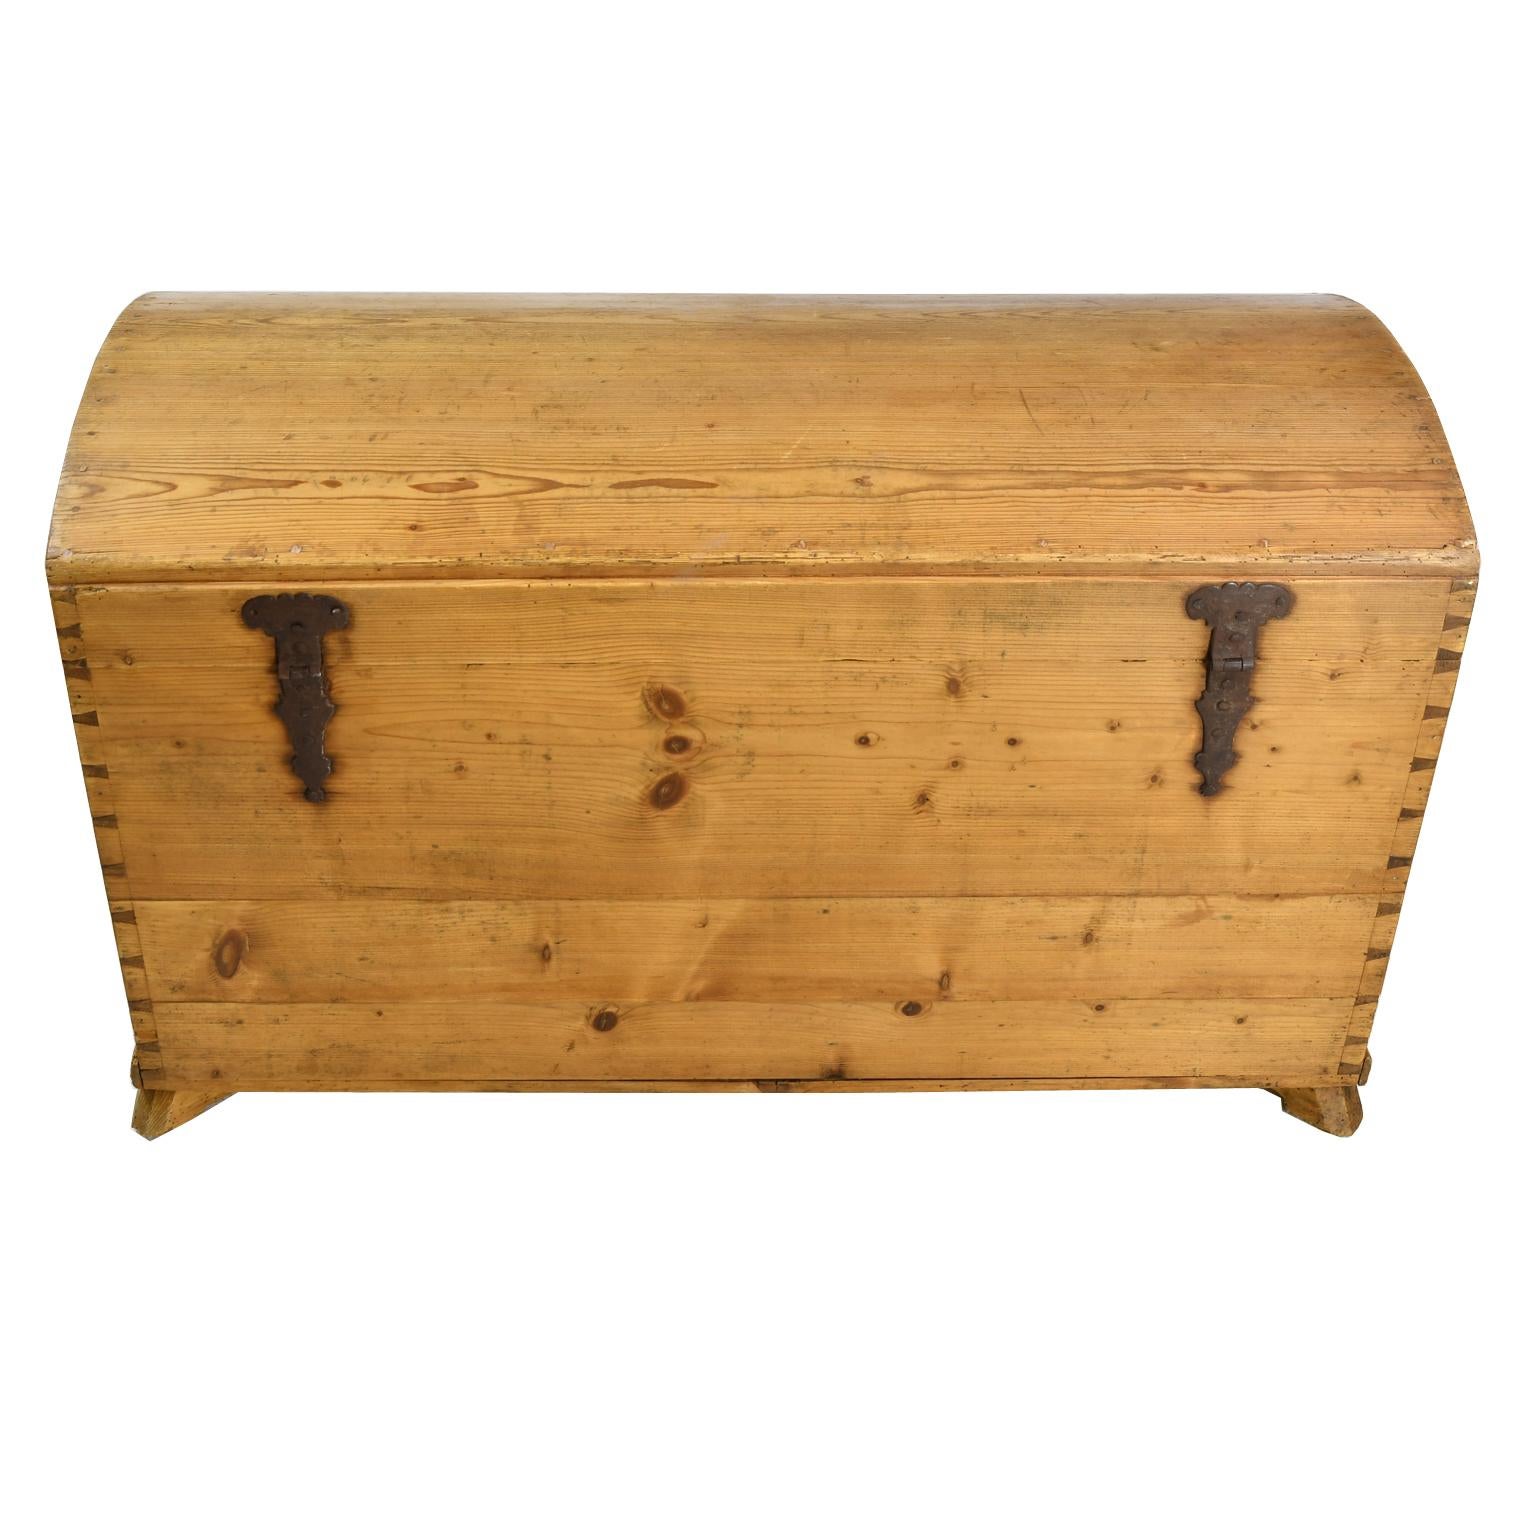 19th Century Antique European Dome-Top Blanket Chest in Pine with Interior Glove Box For Sale